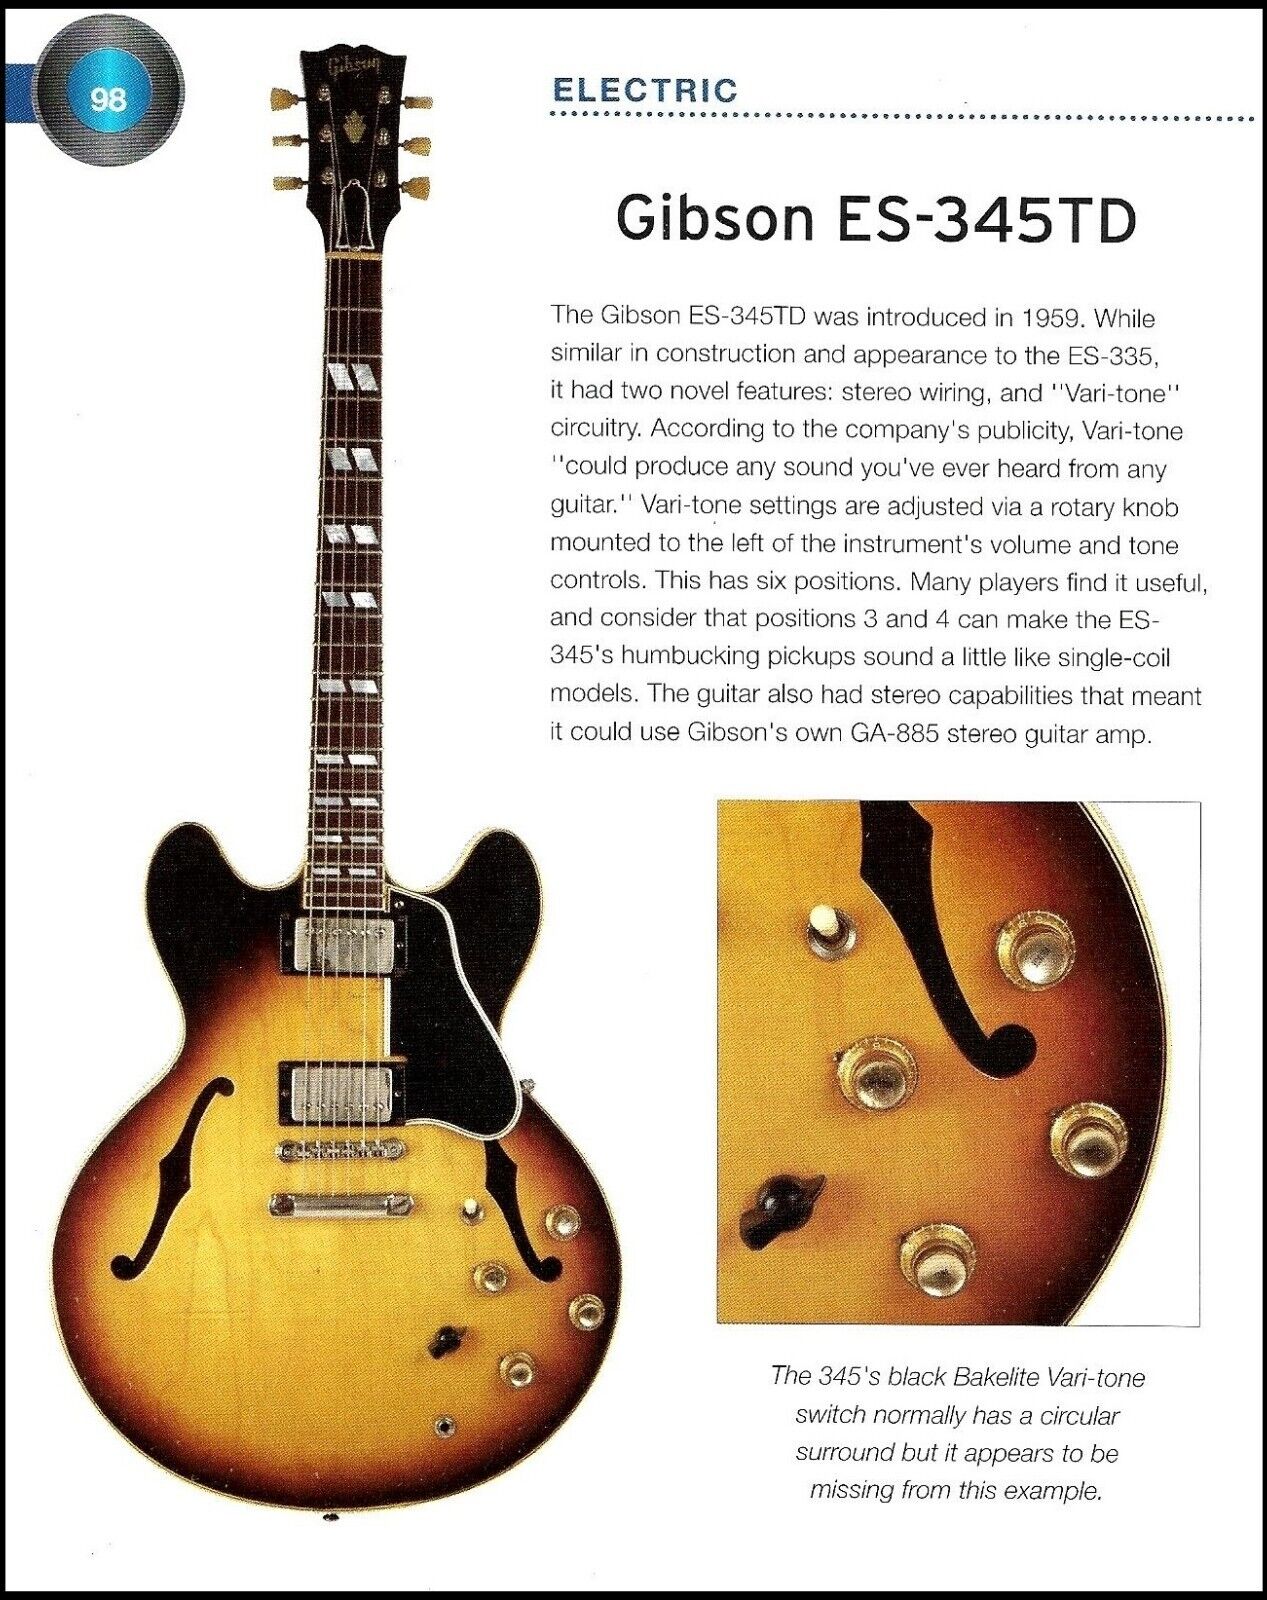 1959 Gibson ES-345TD + 1966 Gibson EB-2 Bass guitar history article